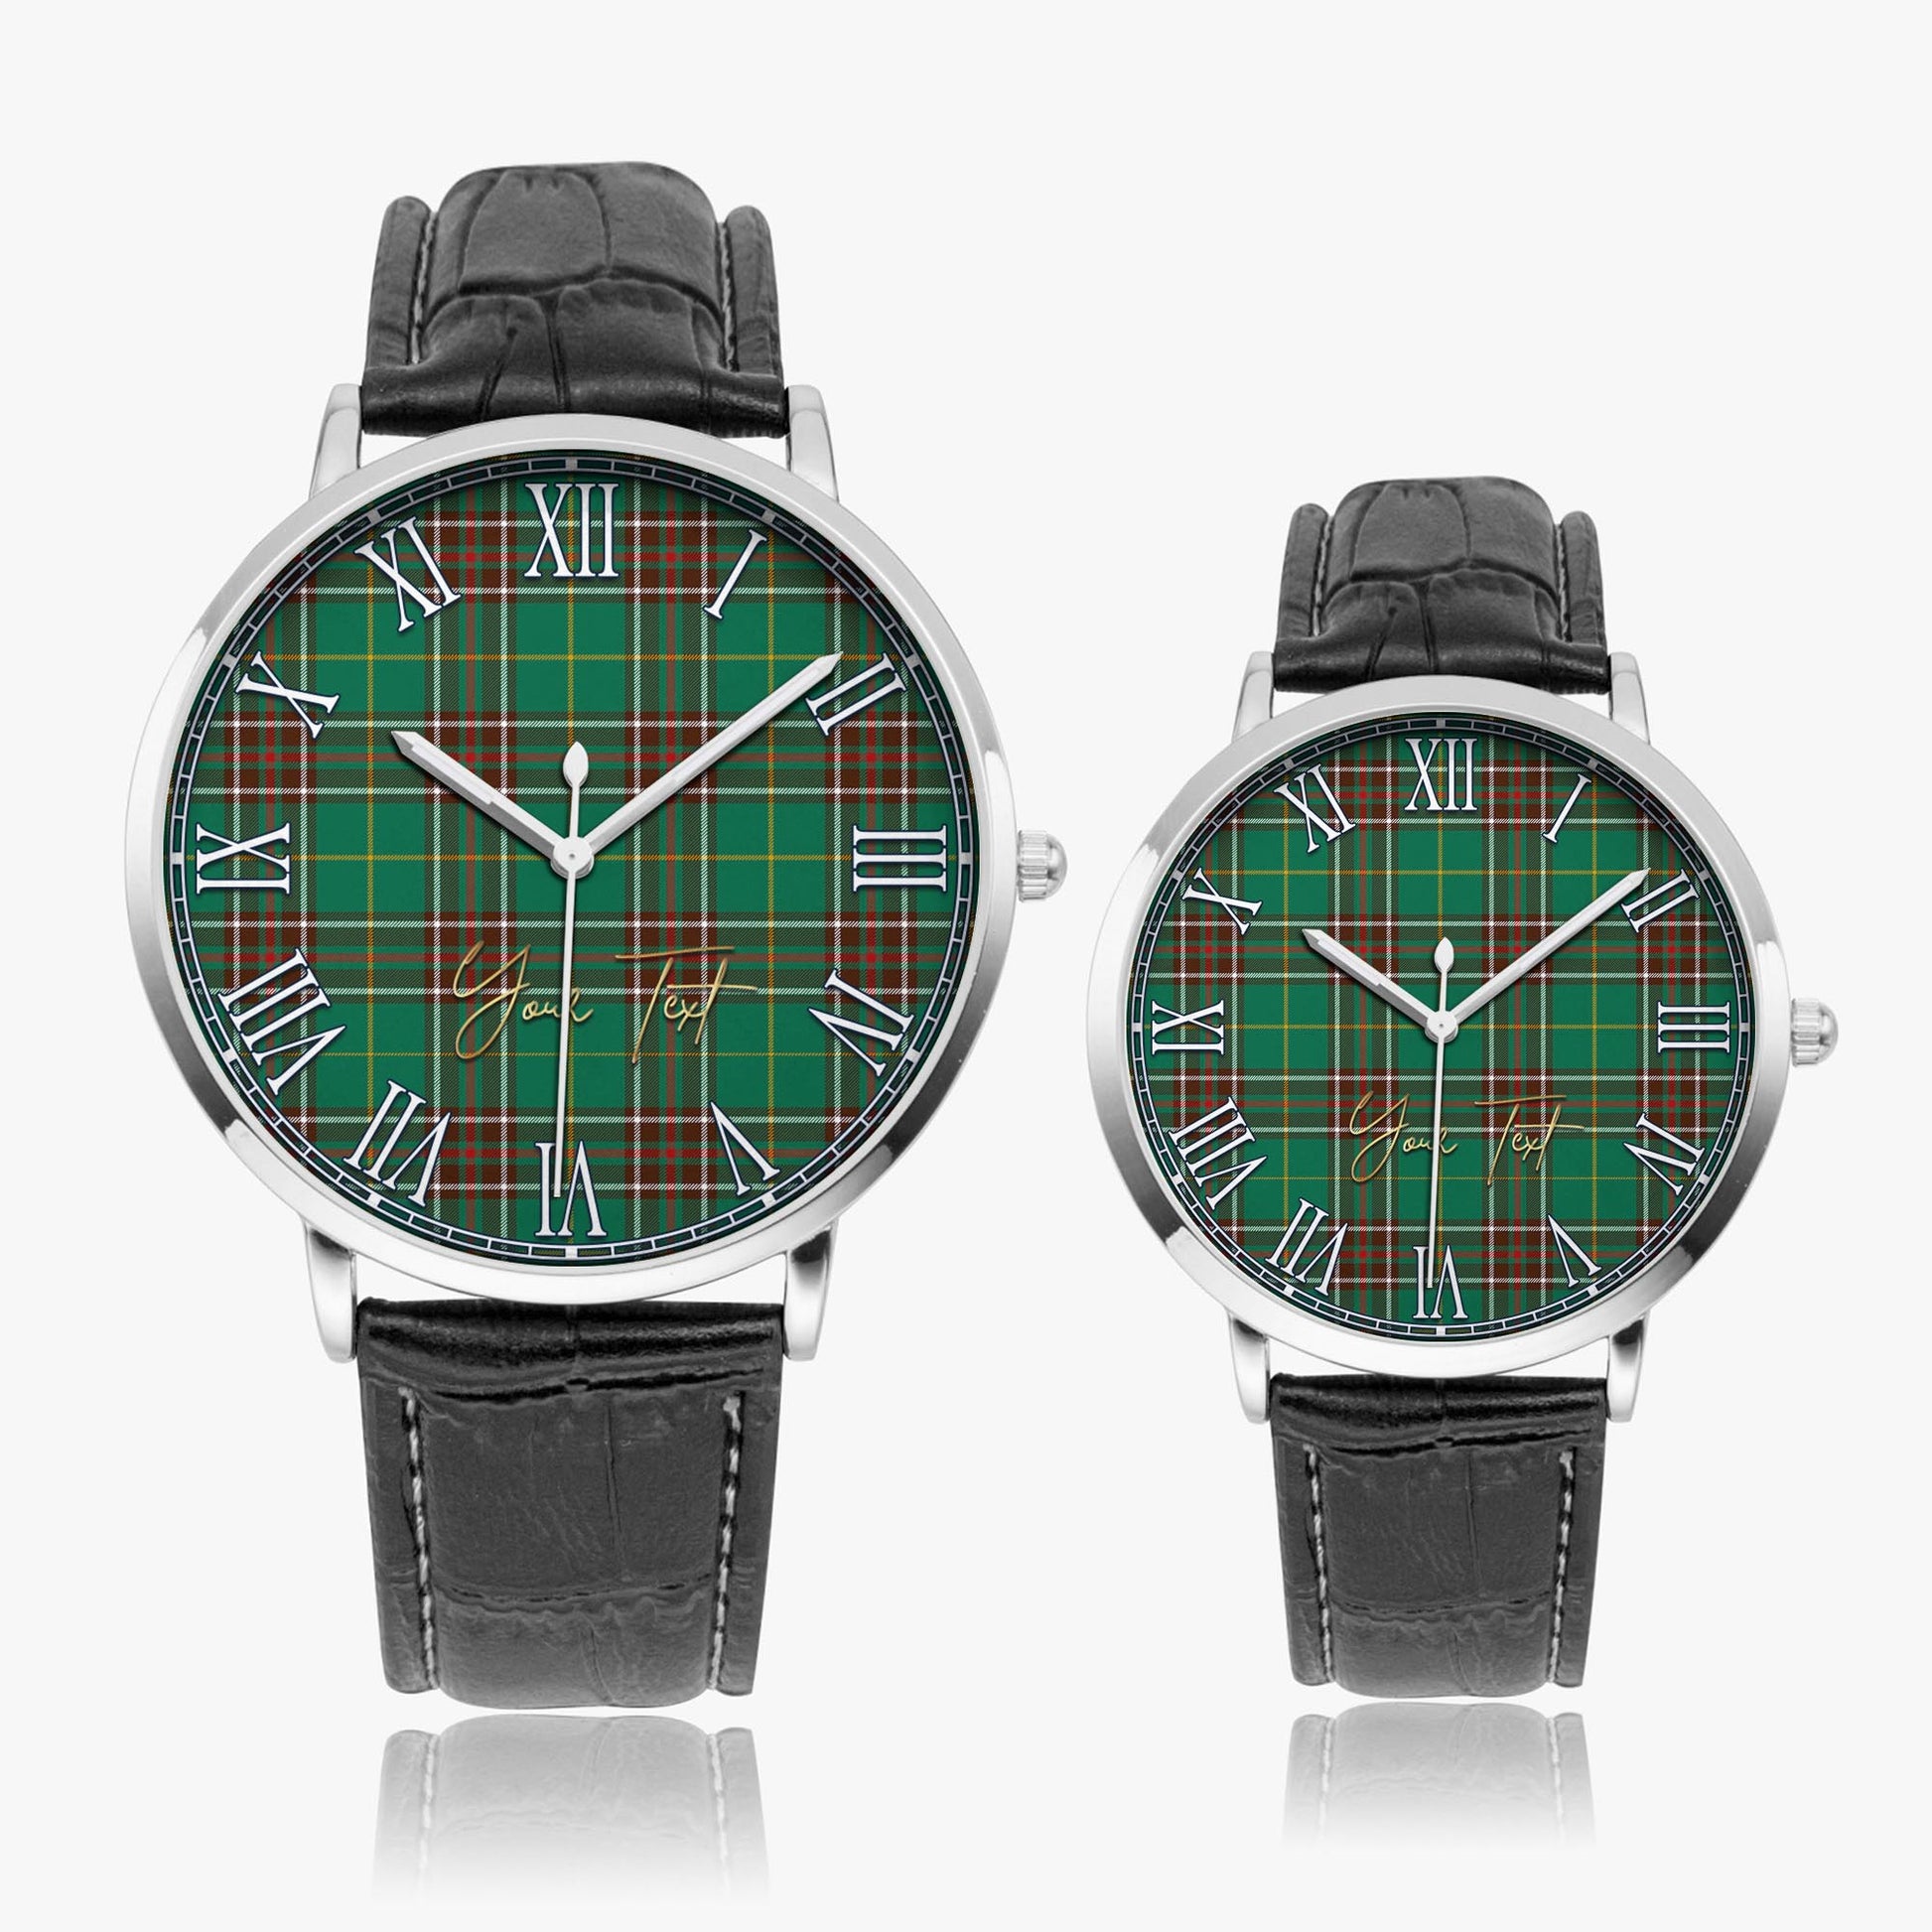 Newfoundland And Labrador Province Canada Tartan Personalized Your Text Leather Trap Quartz Watch Ultra Thin Silver Case With Black Leather Strap - Tartanvibesclothing